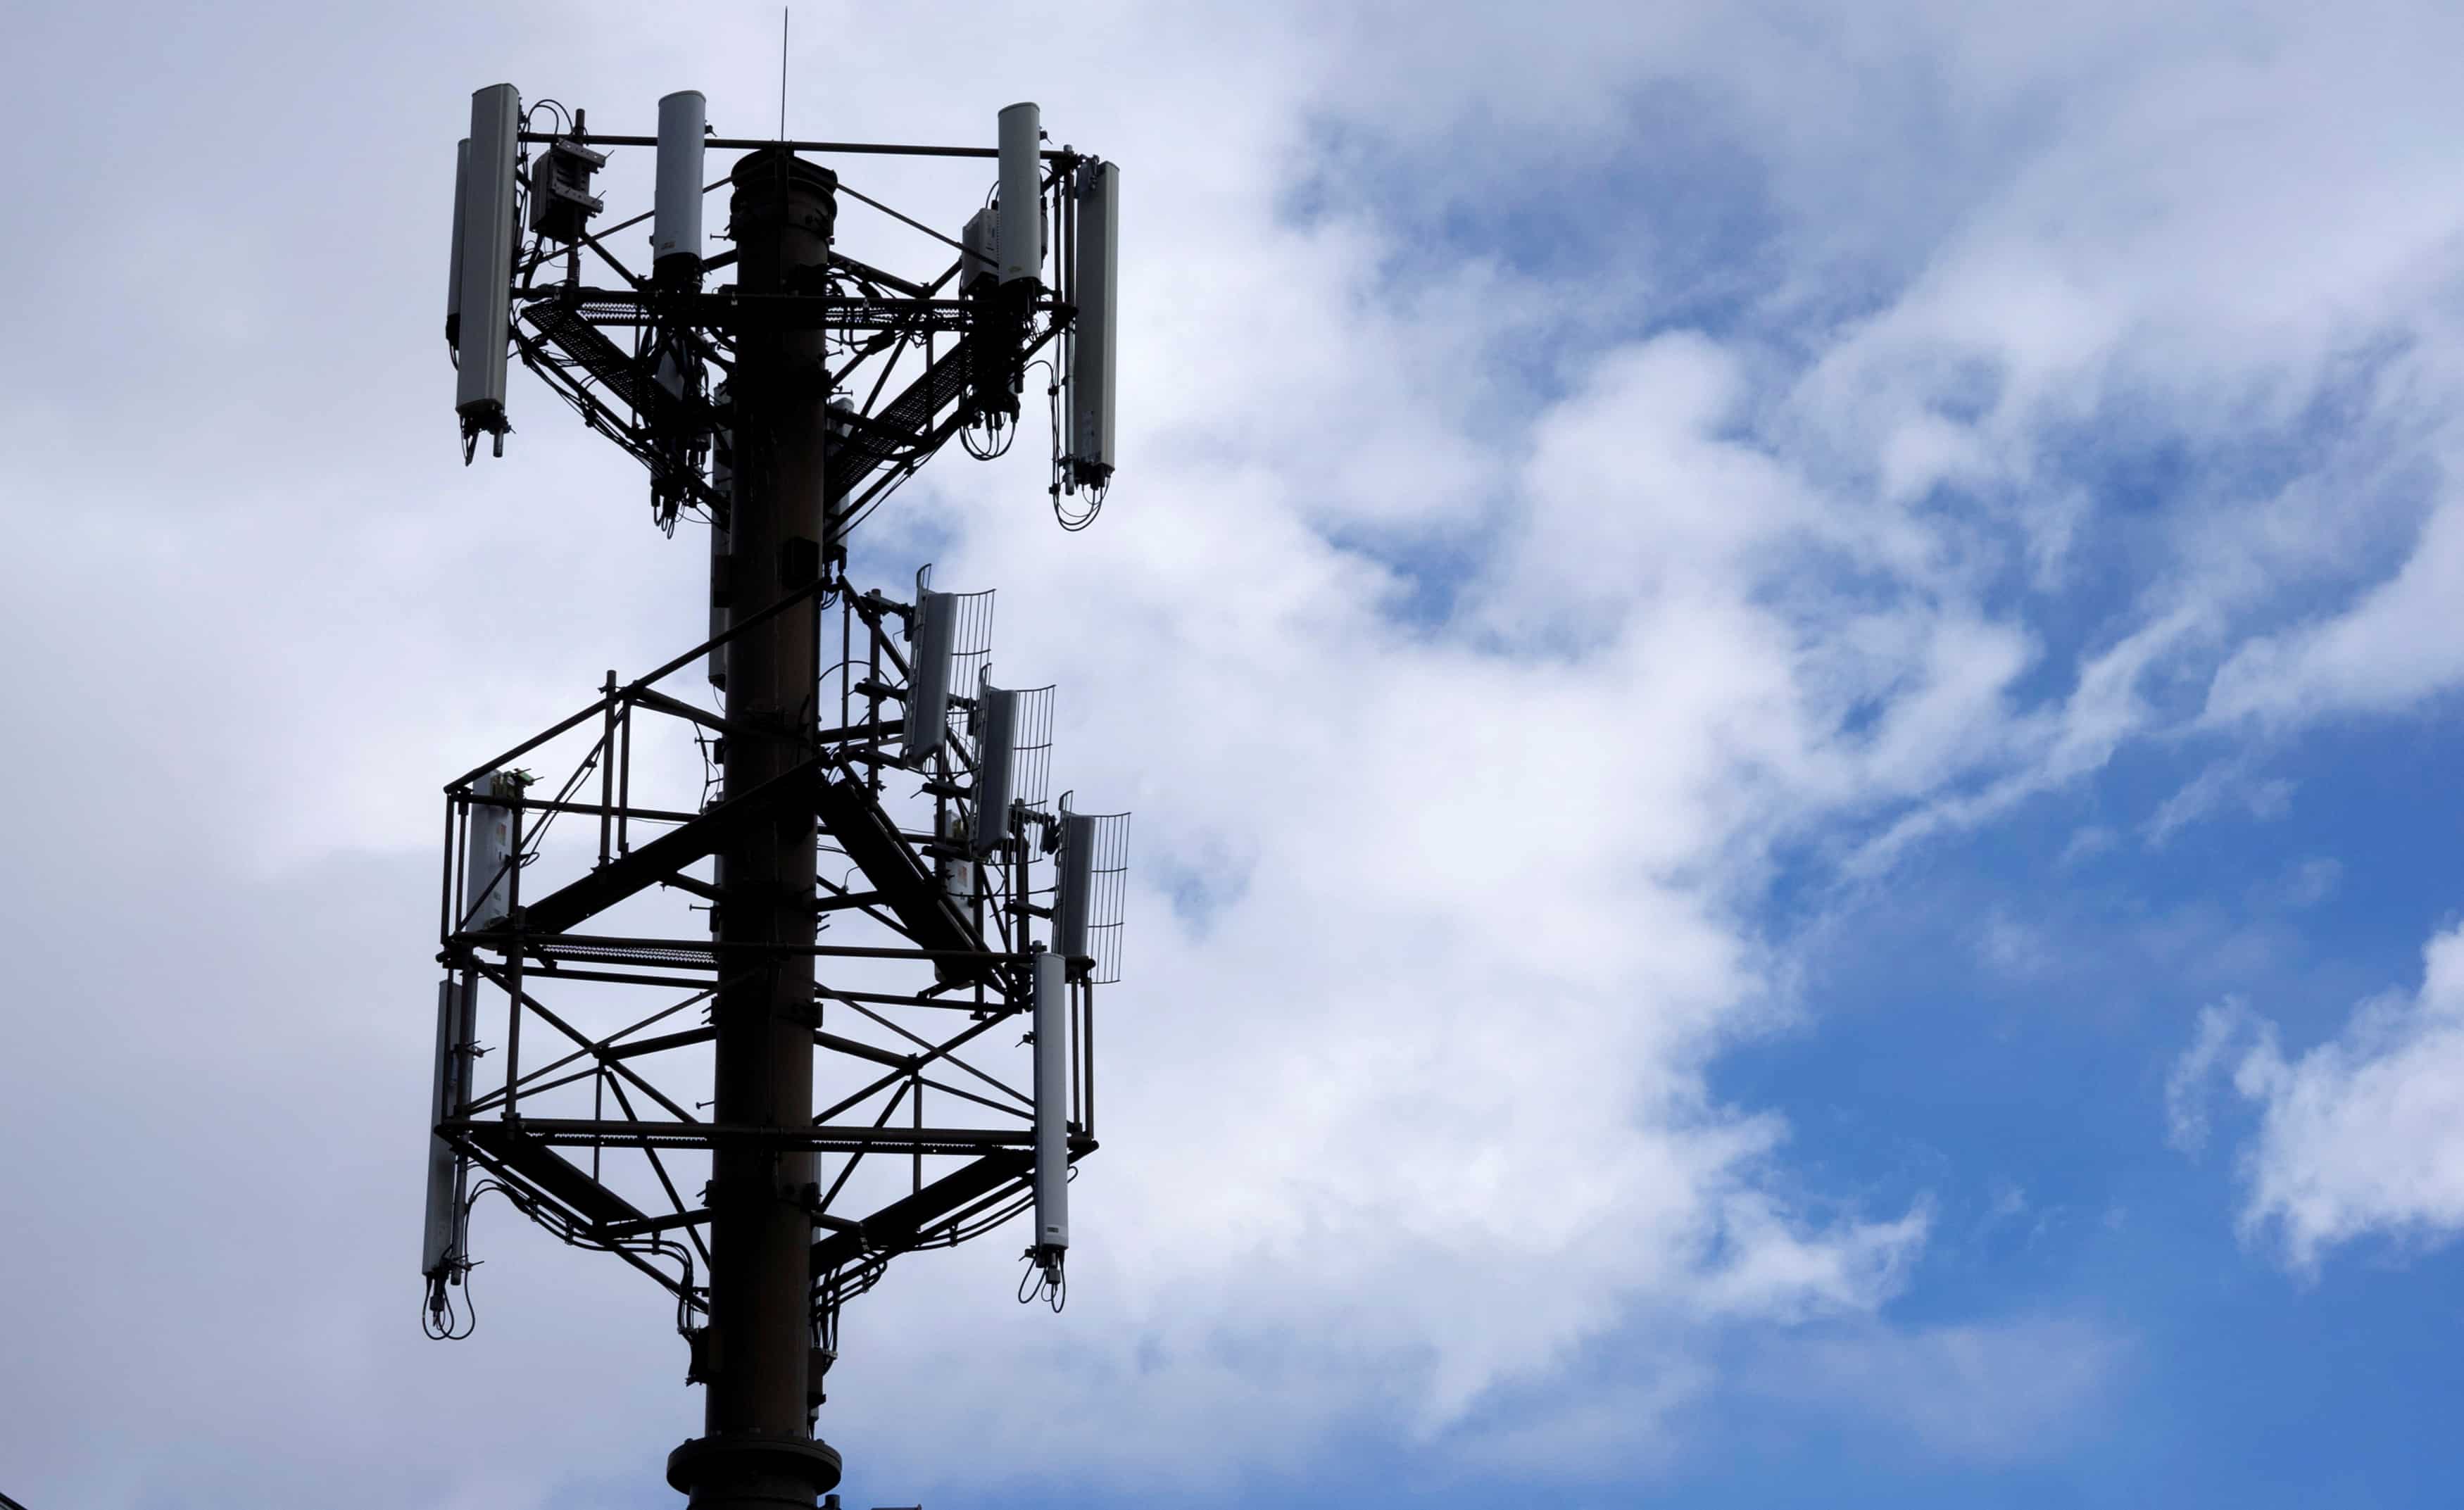 ITU reaches agreement to open new 6 GHz spectrum band for 5G, 6G